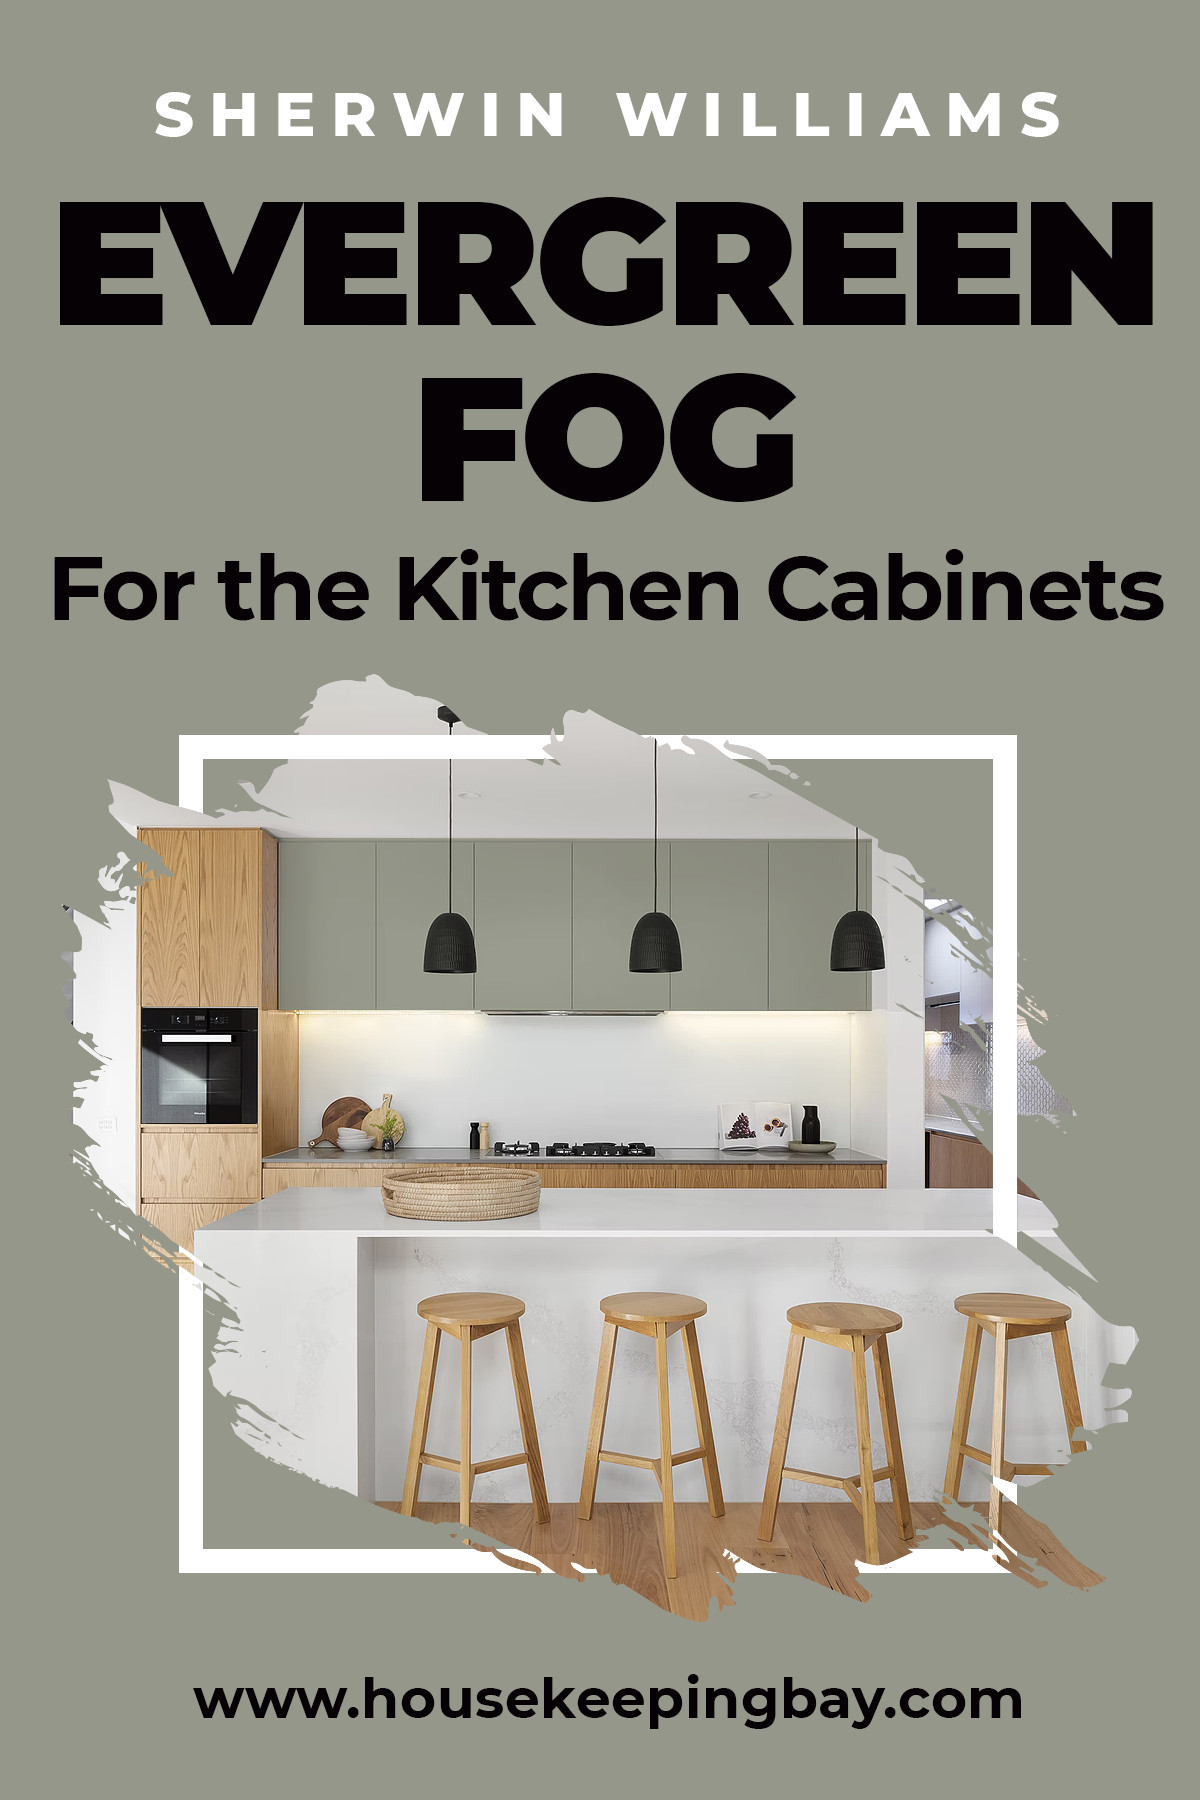 Evergreen for the kitchen cabinets